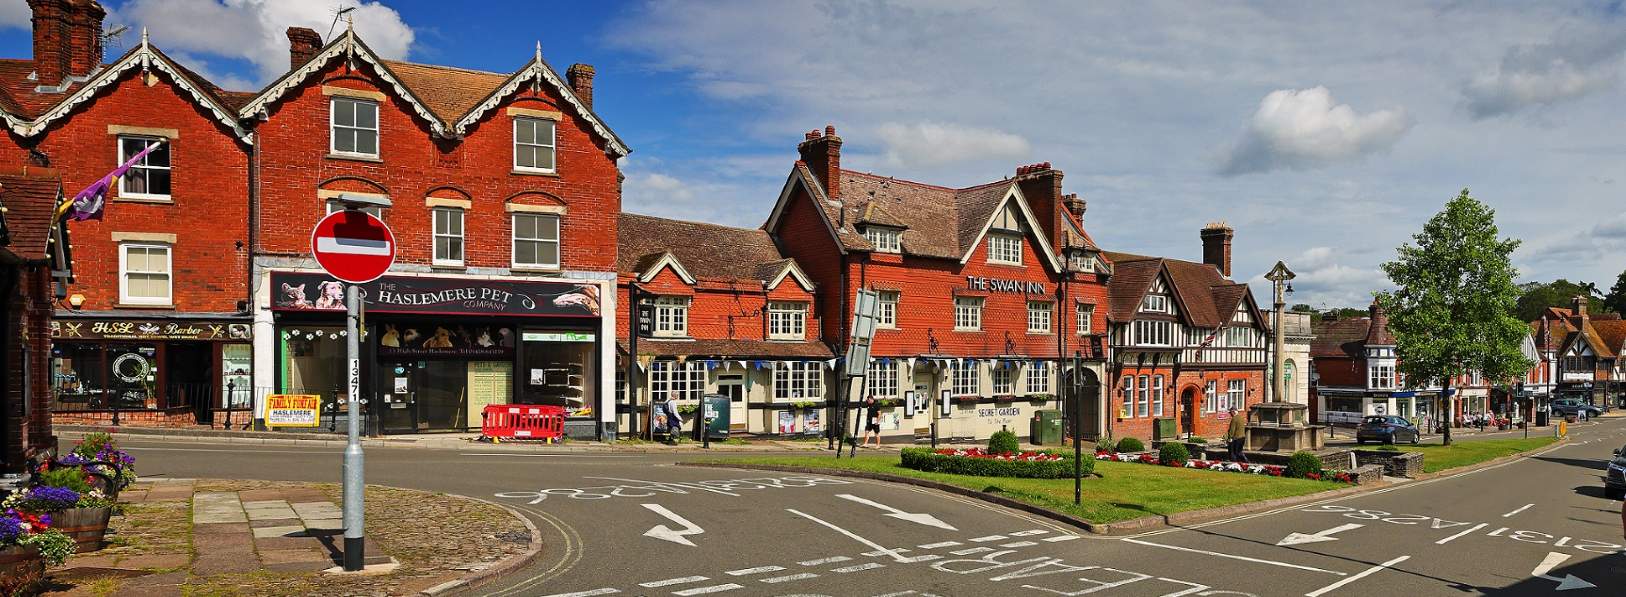 In Focus: Haslemere